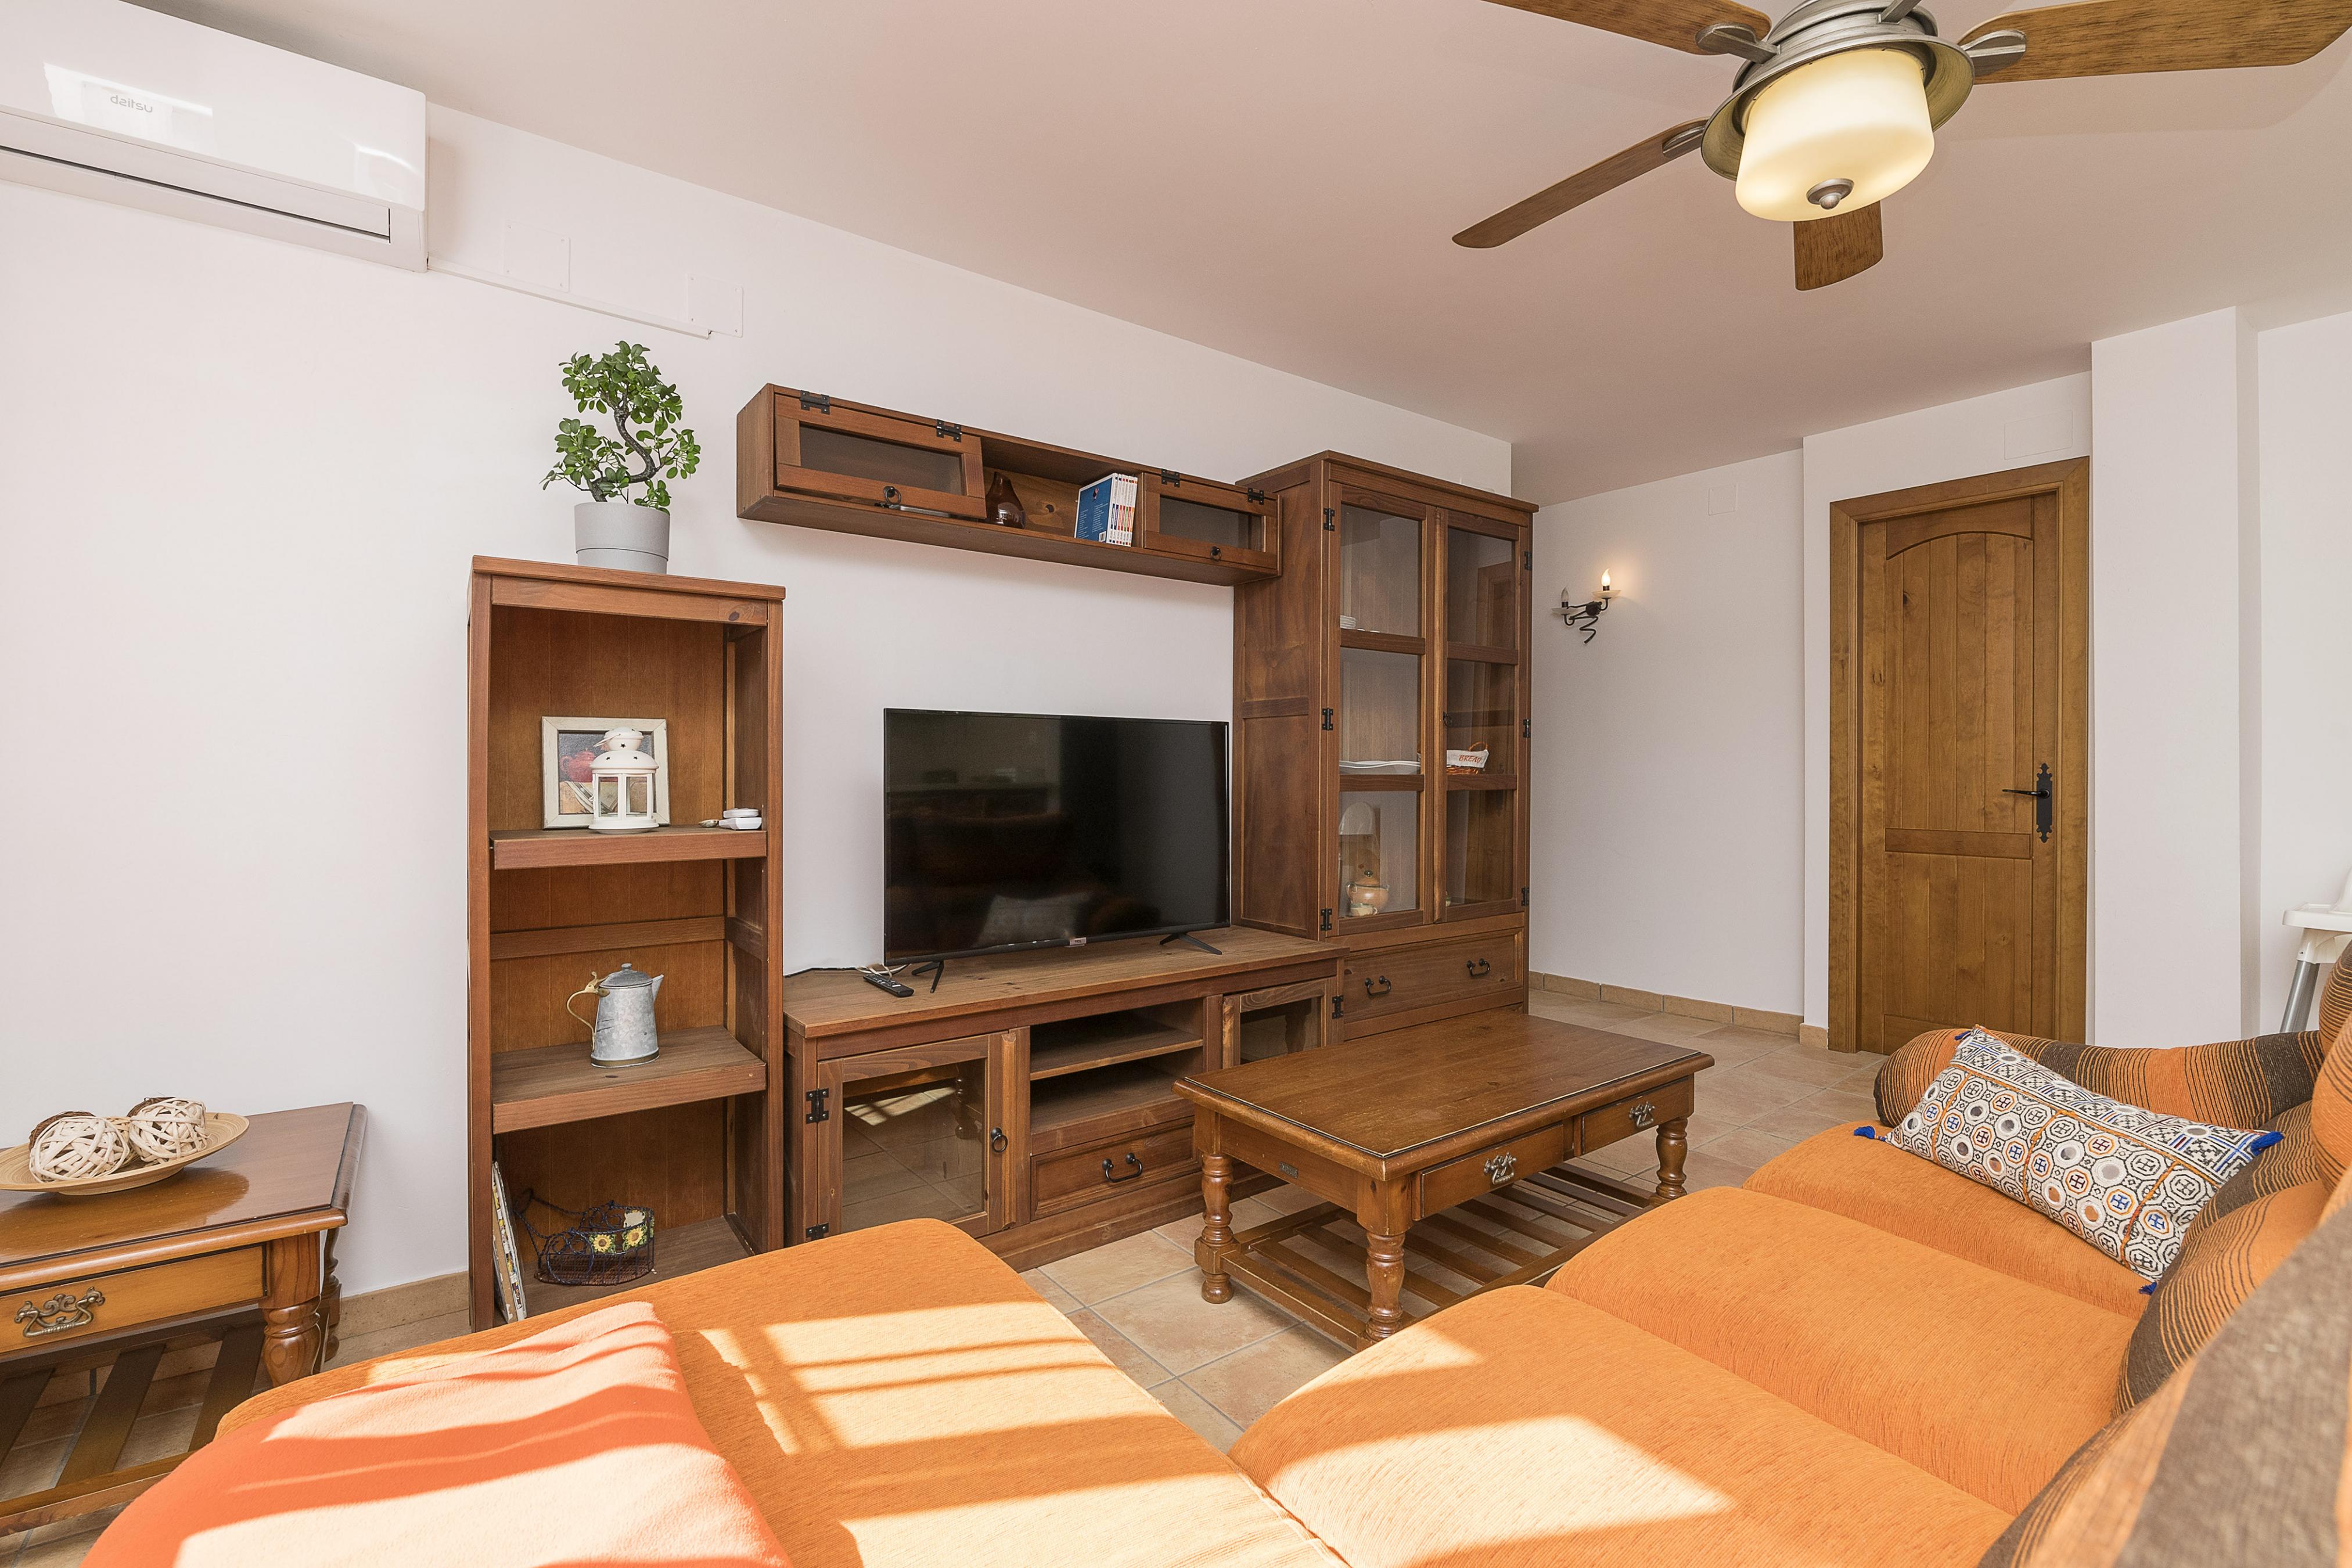 Property Image 2 - AZORIN - Cozy apartment 500 meters from the beach